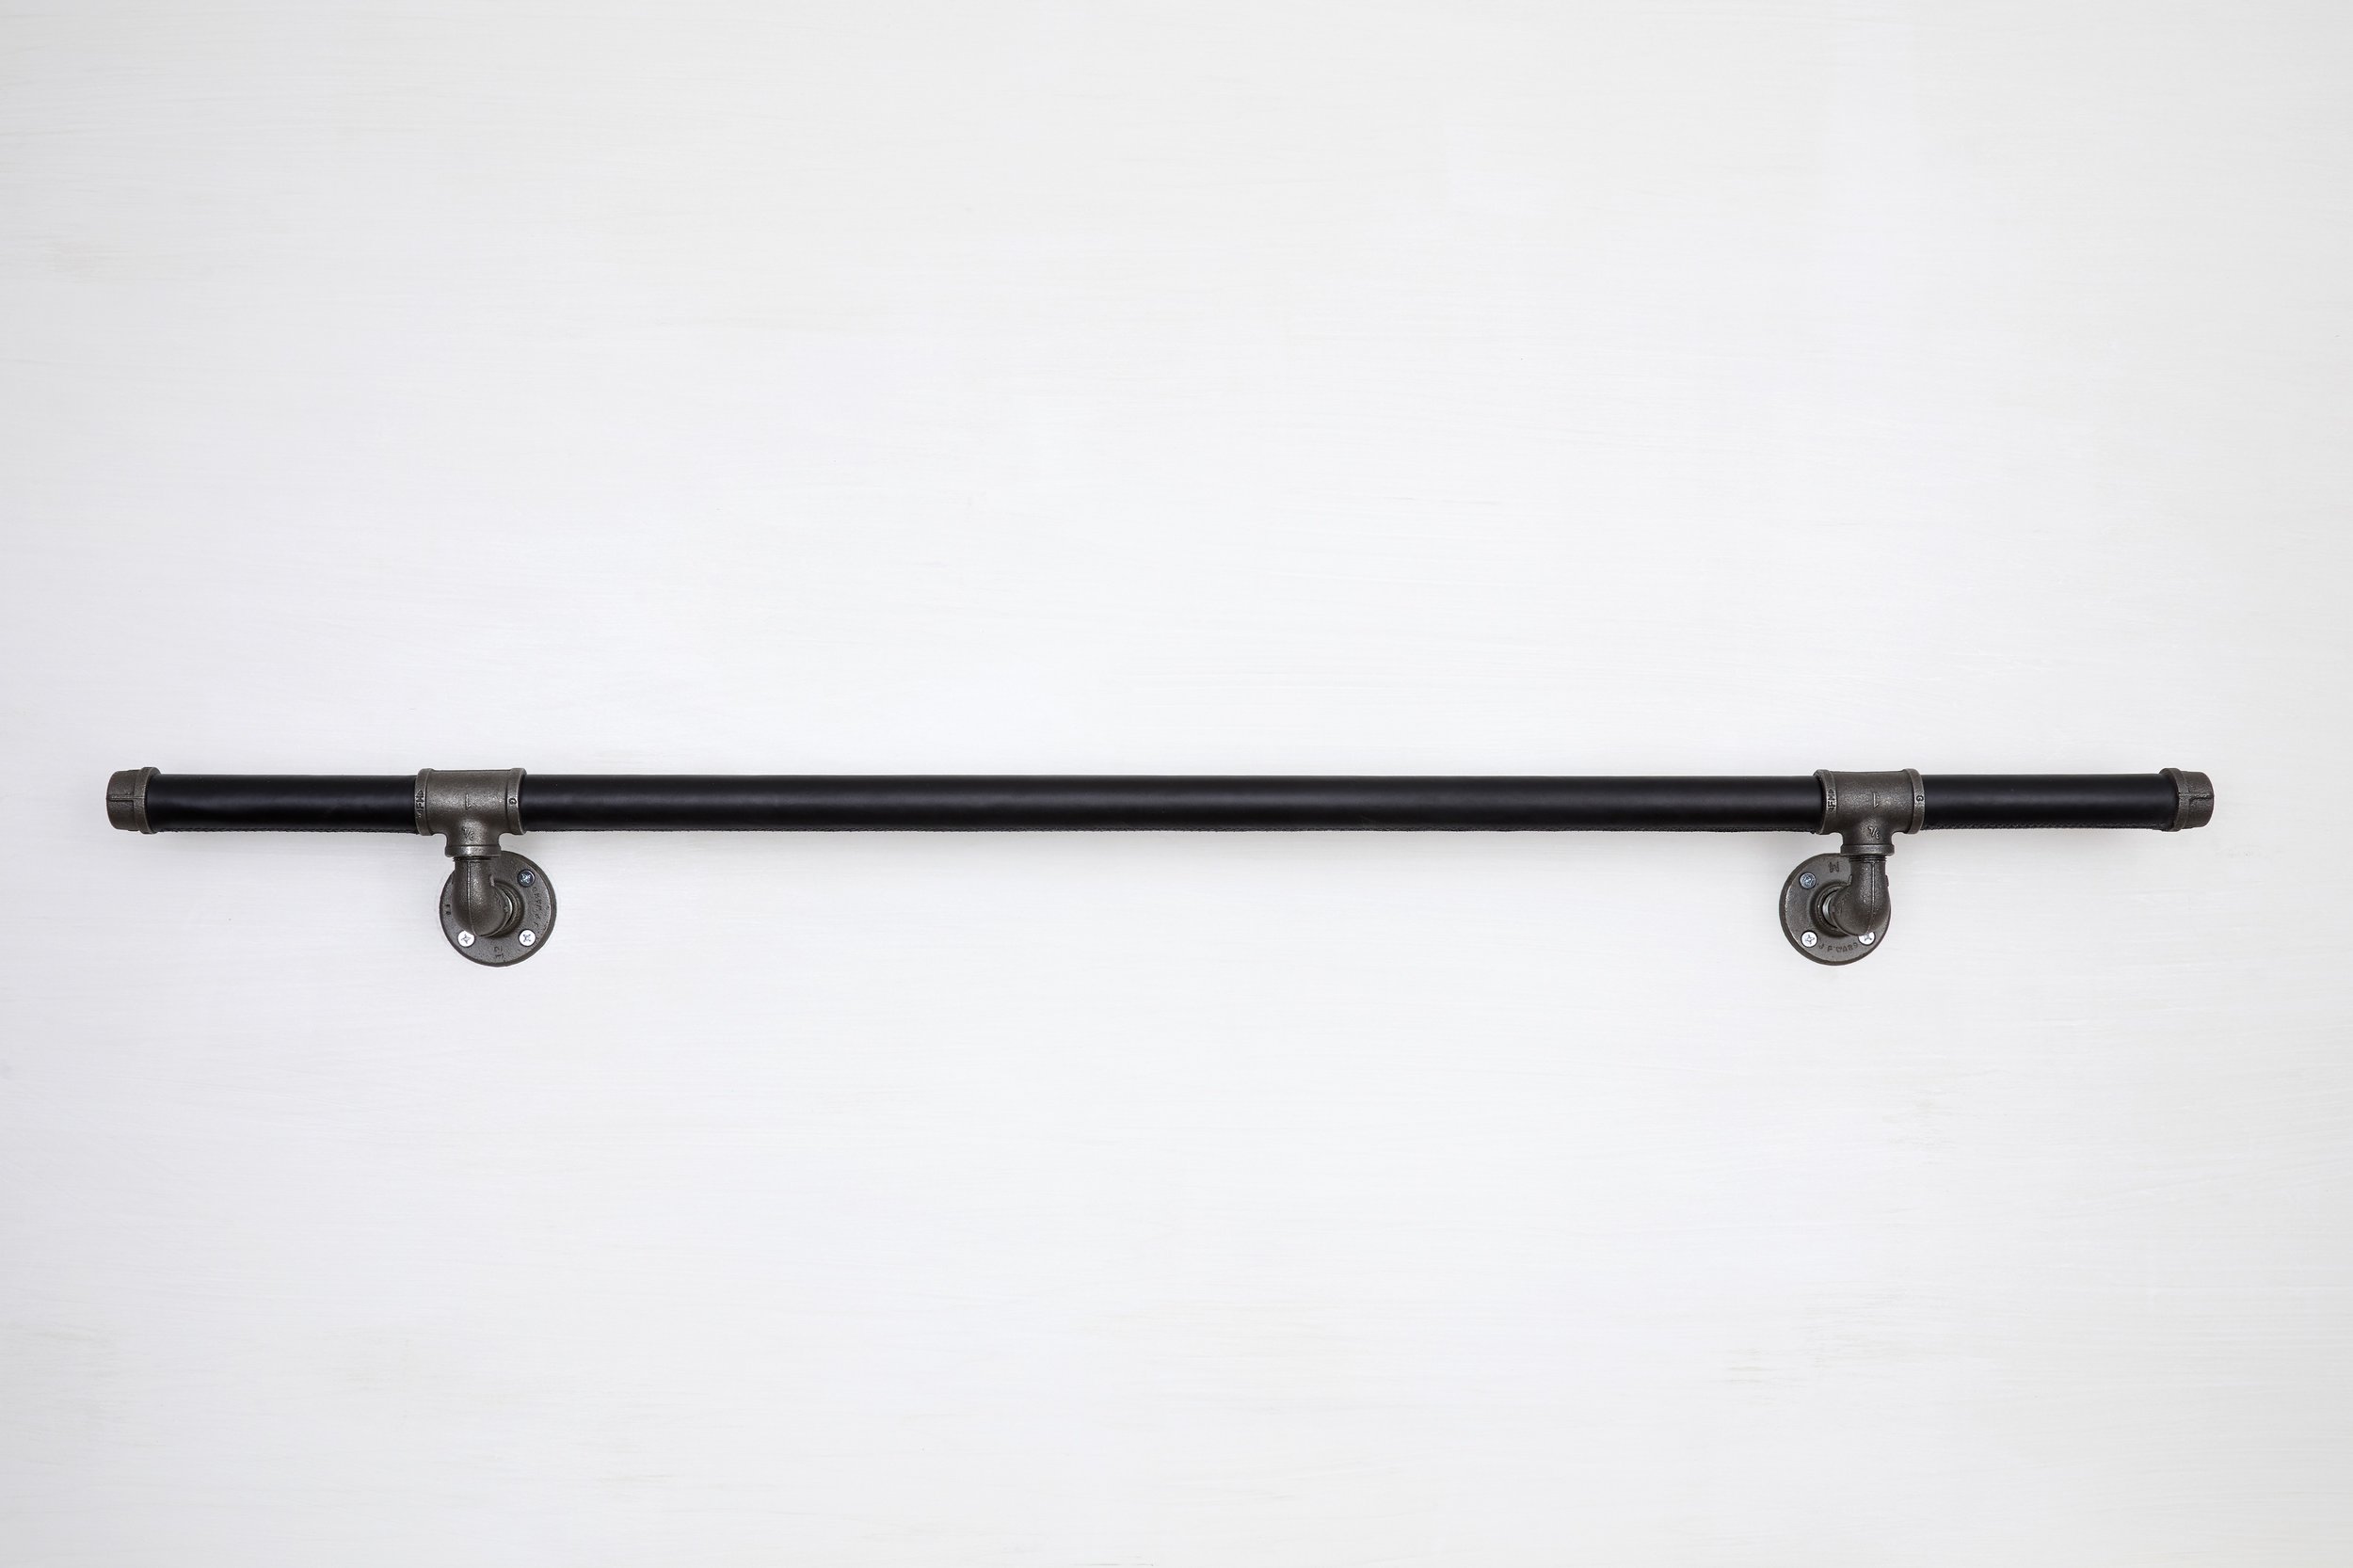 Black leather handrail wall mounted with industrial stainless steel supports